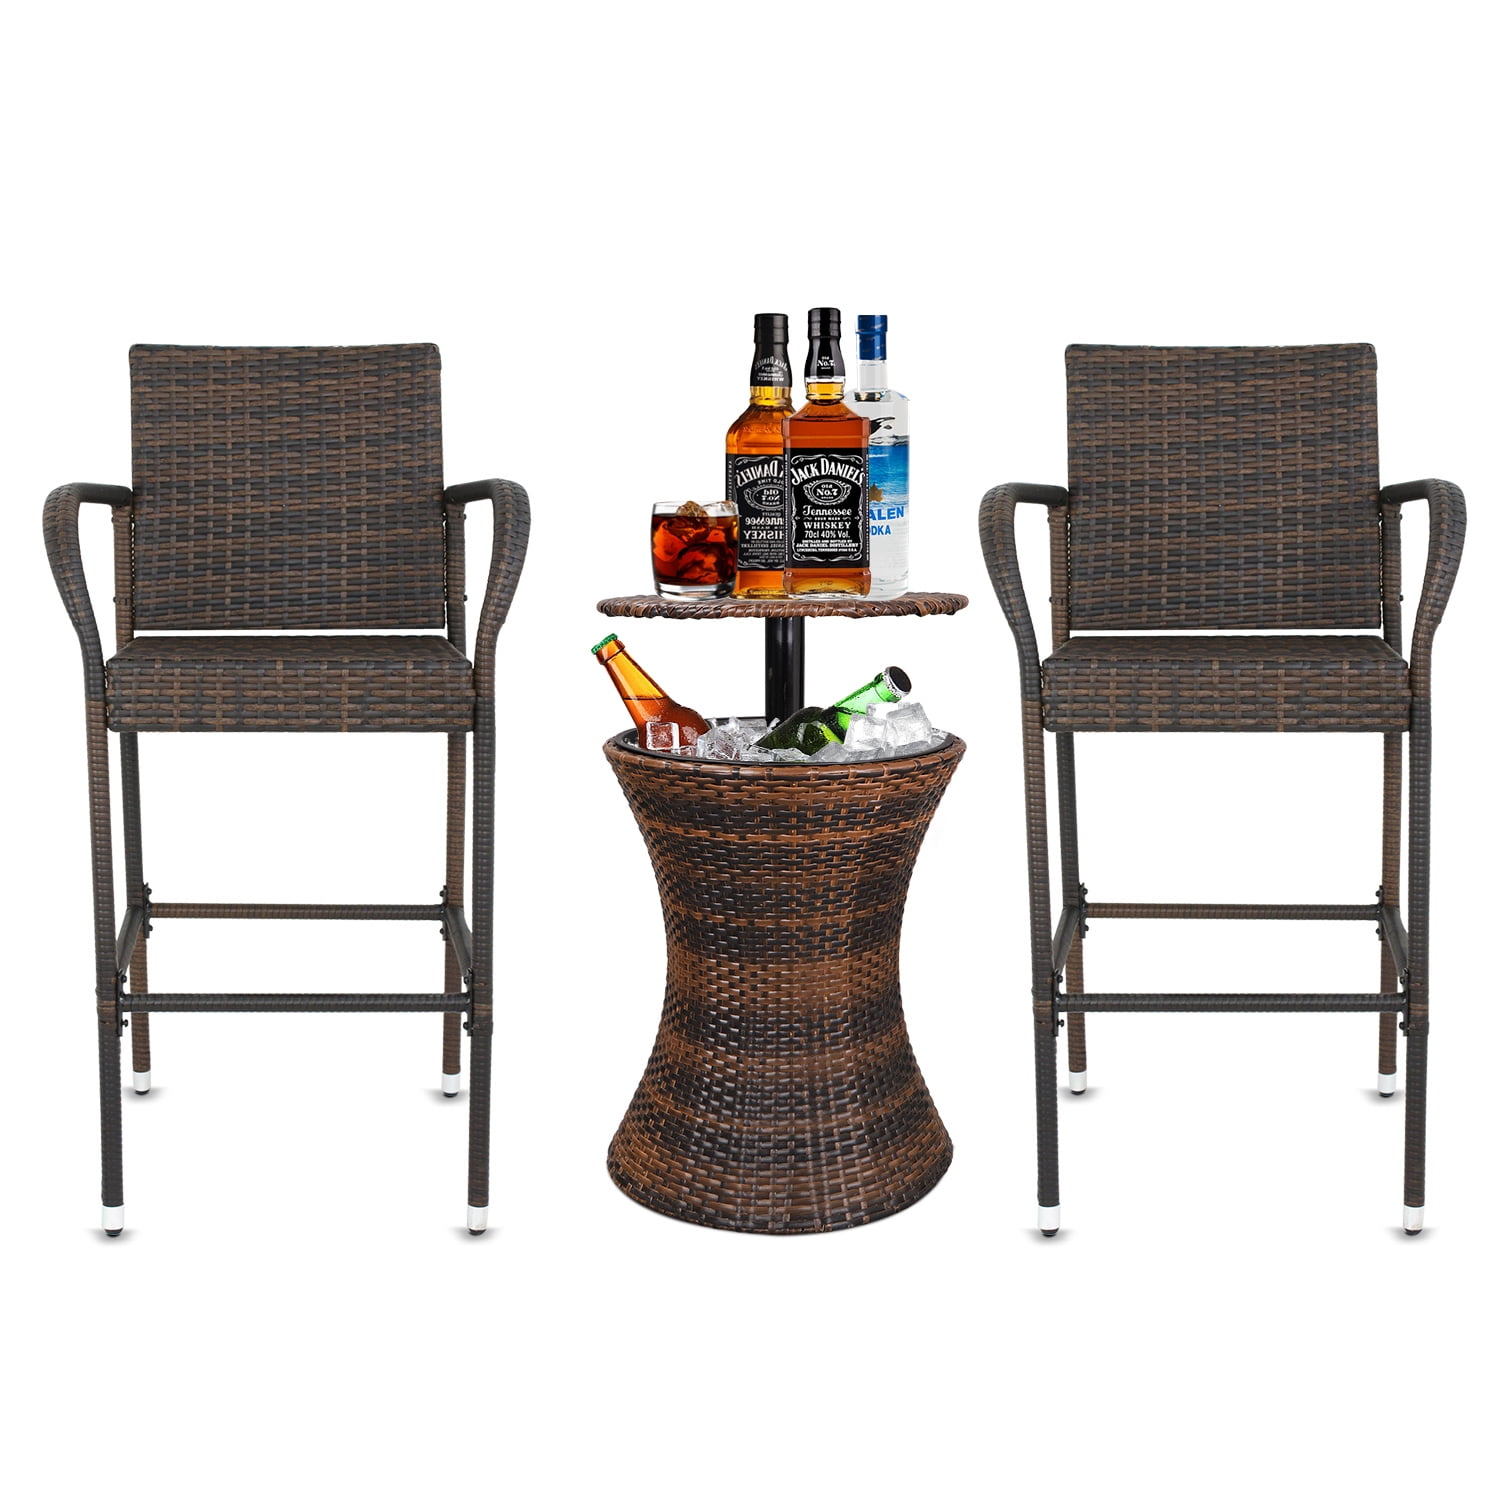 two rattan wicker barstools armrest chairs  cool bar ice bucket bar table  cooler outdoor indoor party pool stool sets